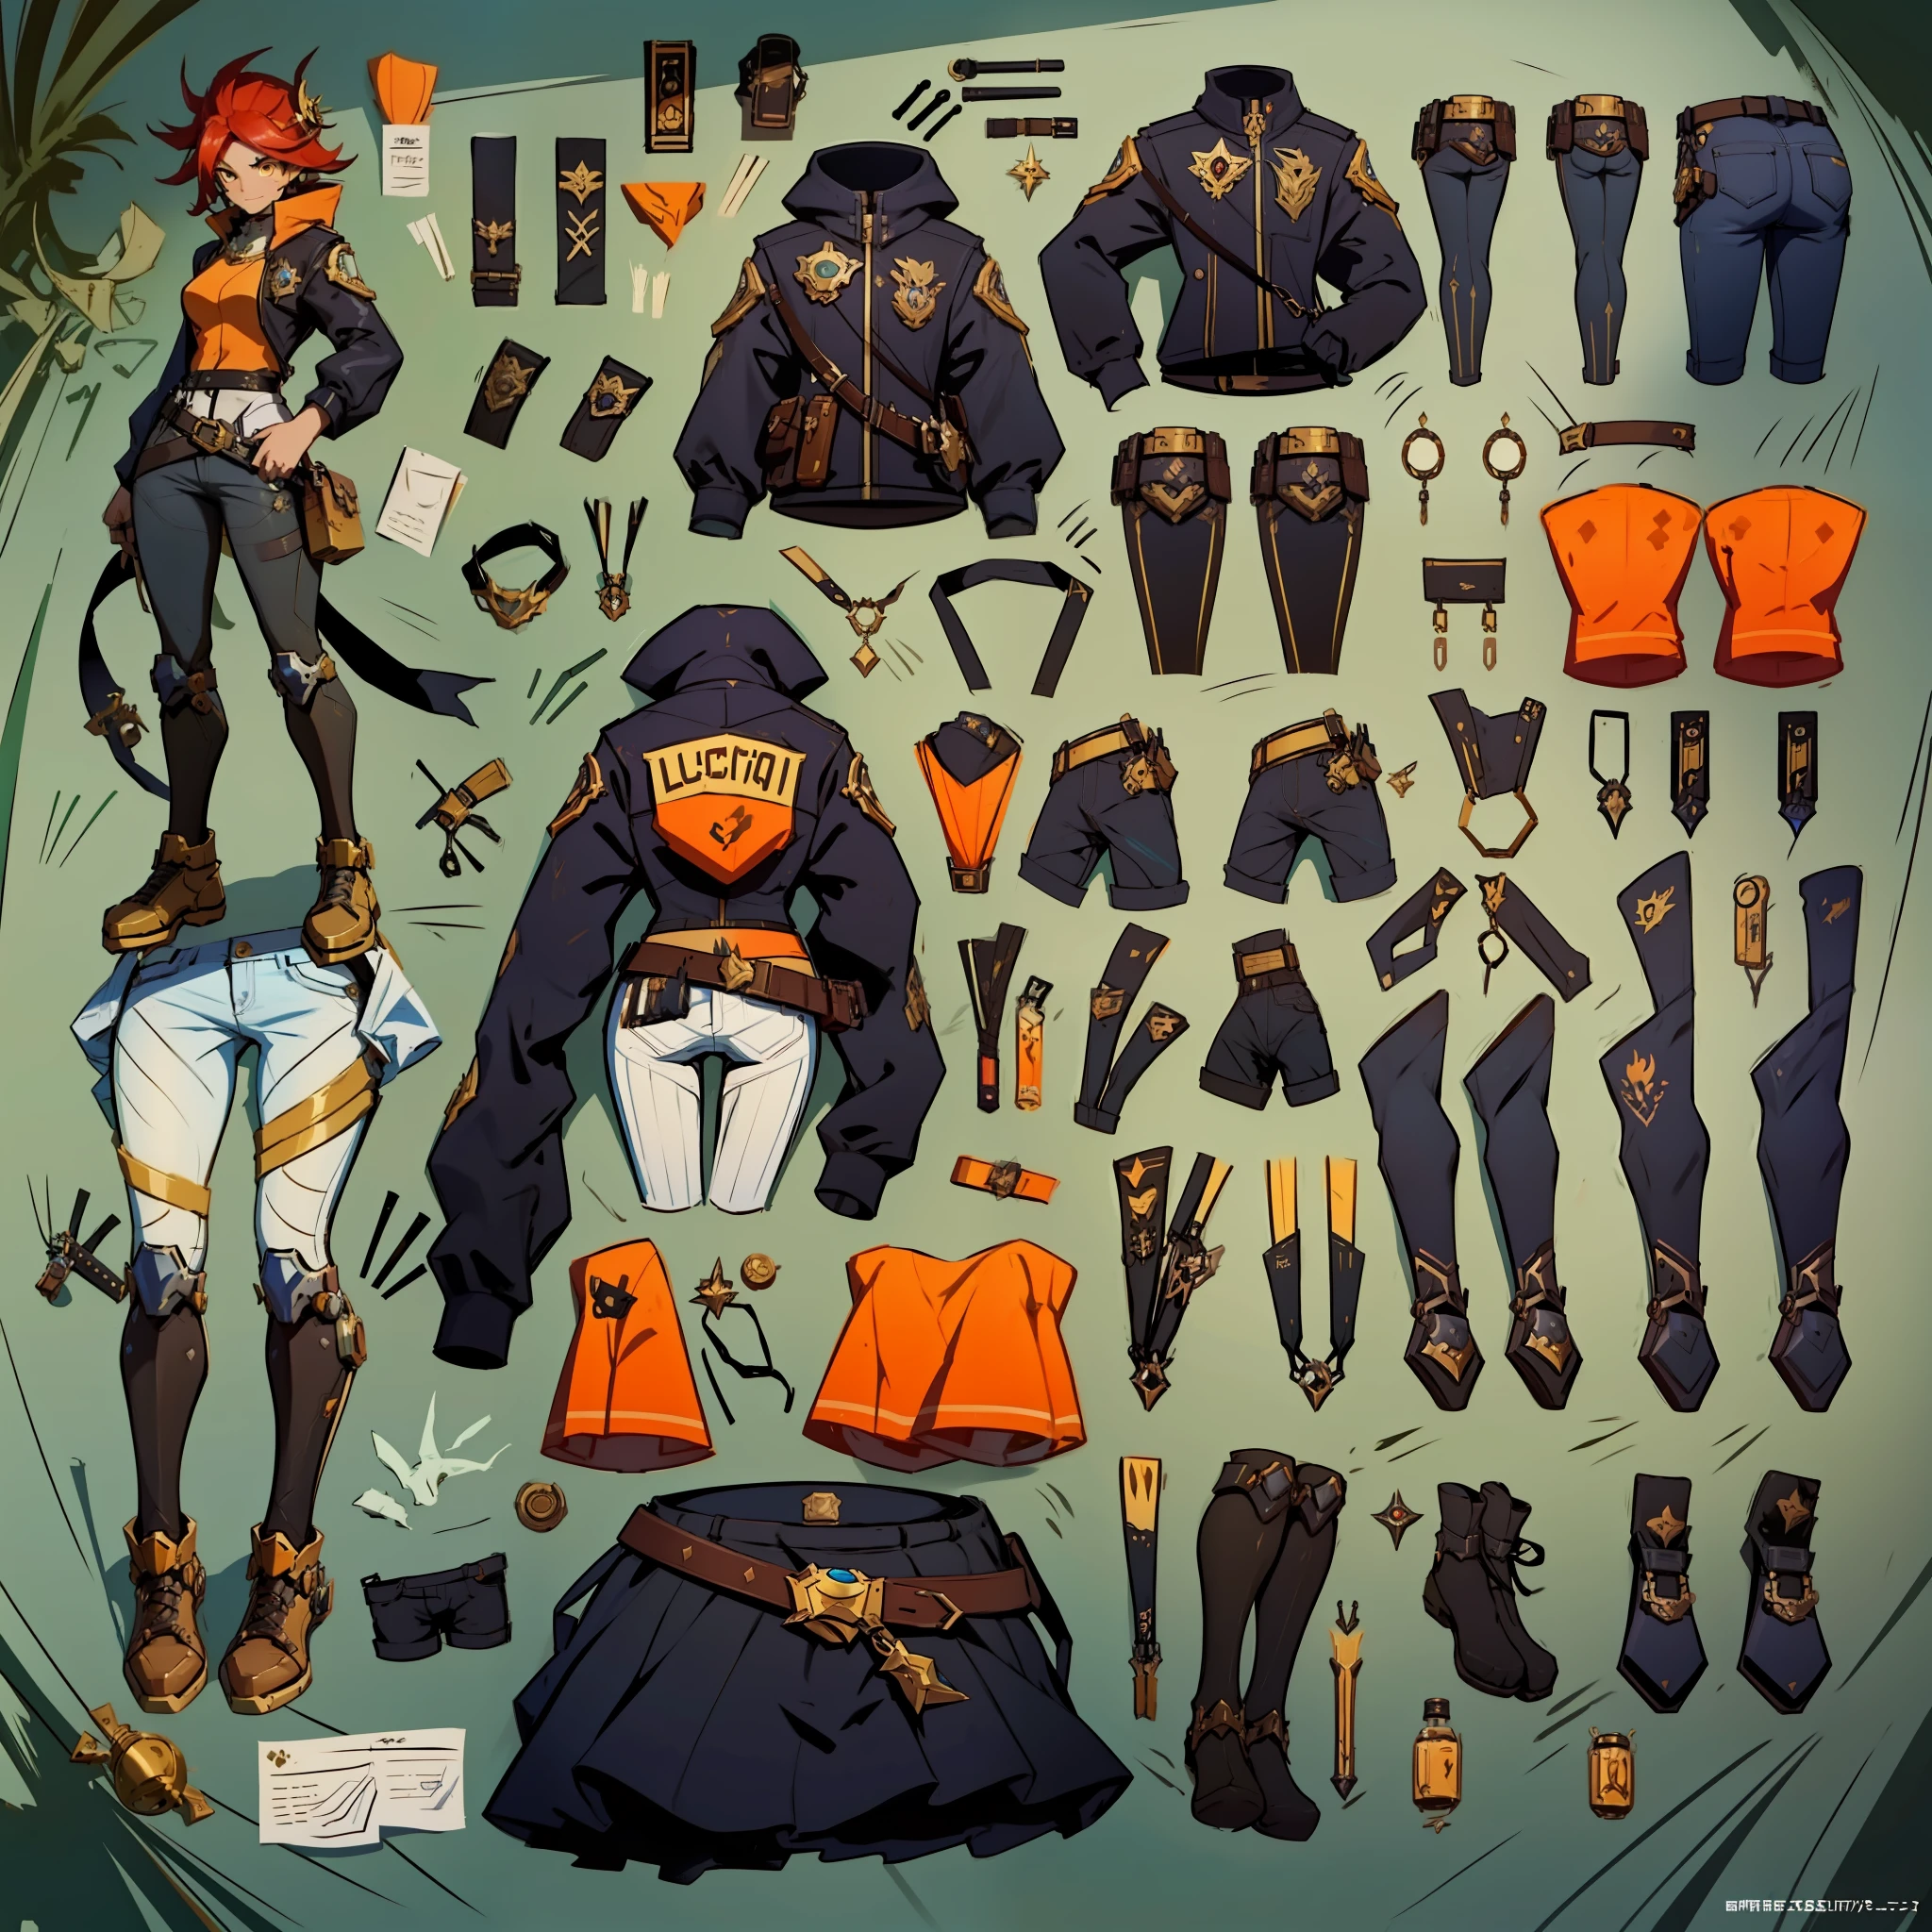 Close-up of a man in a gun costume, ((character concept art)), tall figure, ((character design sheet, same character, front, side, back)) maple story character art, video game character design, video game character design, maple story gun girl, girl with cute cartoon rabbit hairpin on her head, yellow glowing decoration on girl's clothes, expert high detail concept art, metal bullet concept art, funny character design, Lucio as a woman, gravity dash inspiration, sticky tar. Concept art, belt buckle at waist, steampunk weapon,